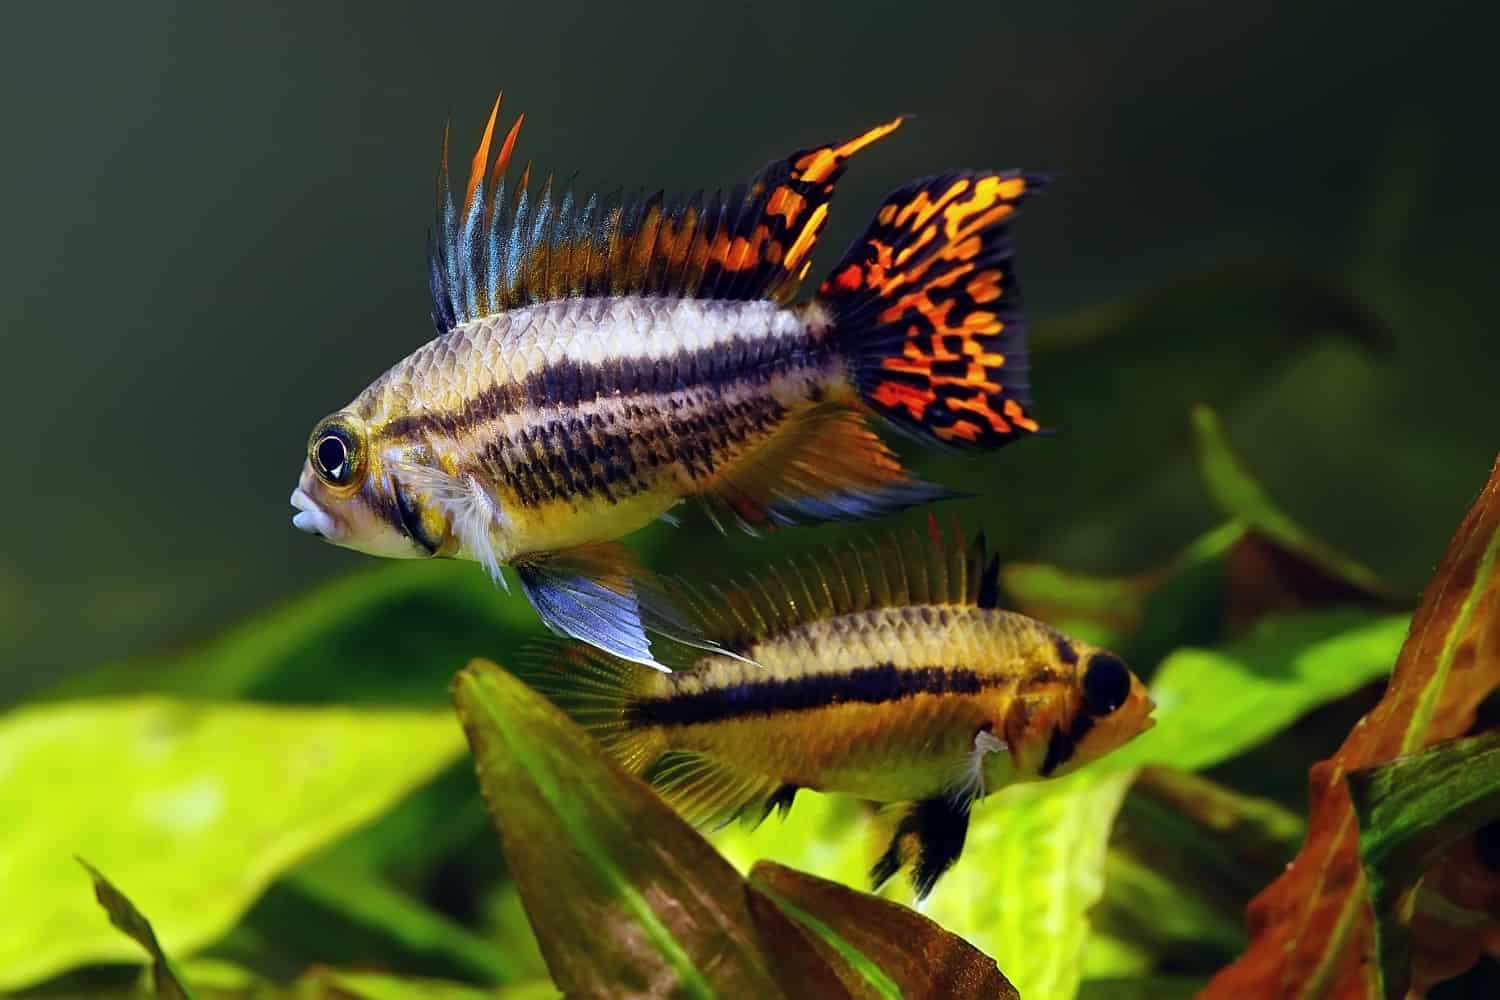 Looking to set up a South American biotope aquarium? These 6 South American cichlids are perfect for beginners! #aquariums